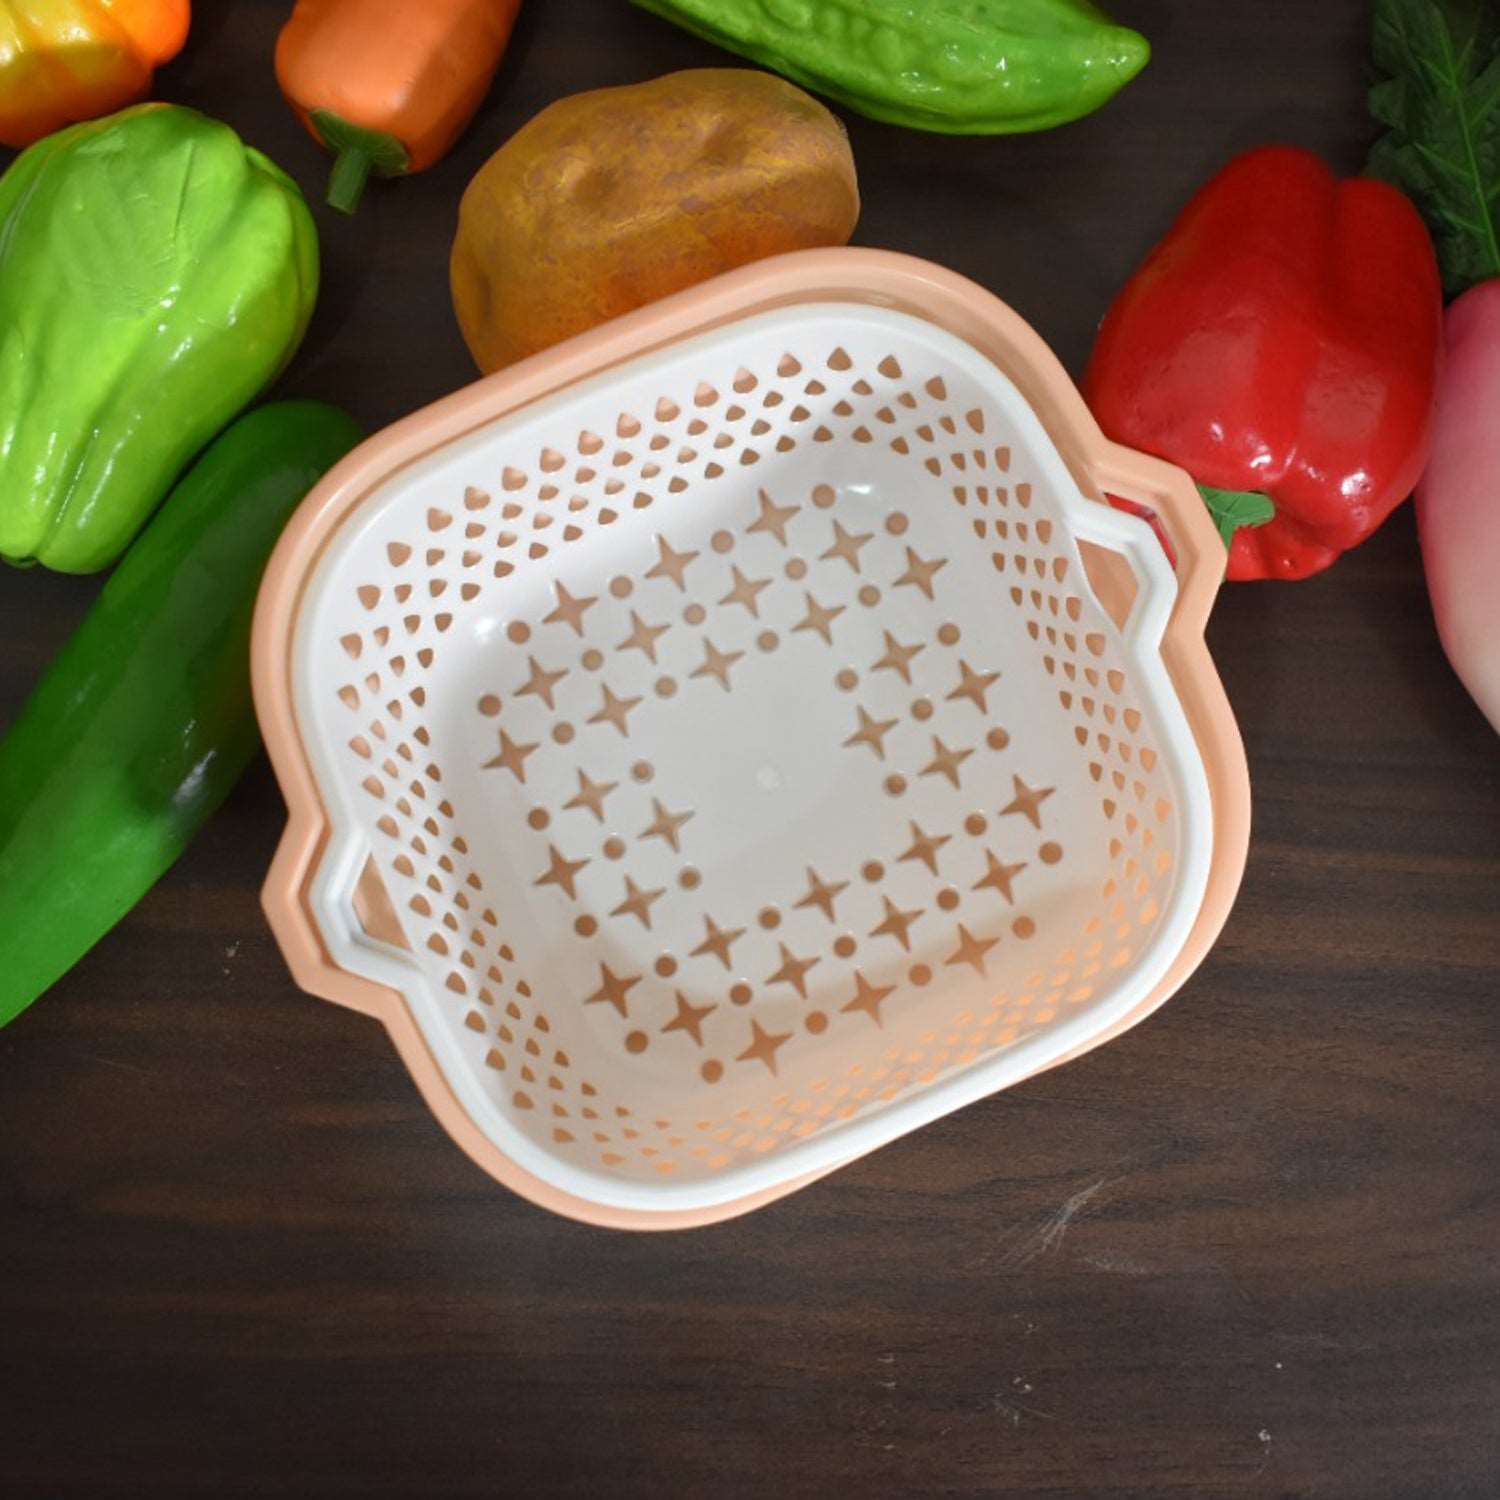 2 In 1 Basket Strainer To Rinse Various Types Of Items Like Fruits, Vegetables Etc